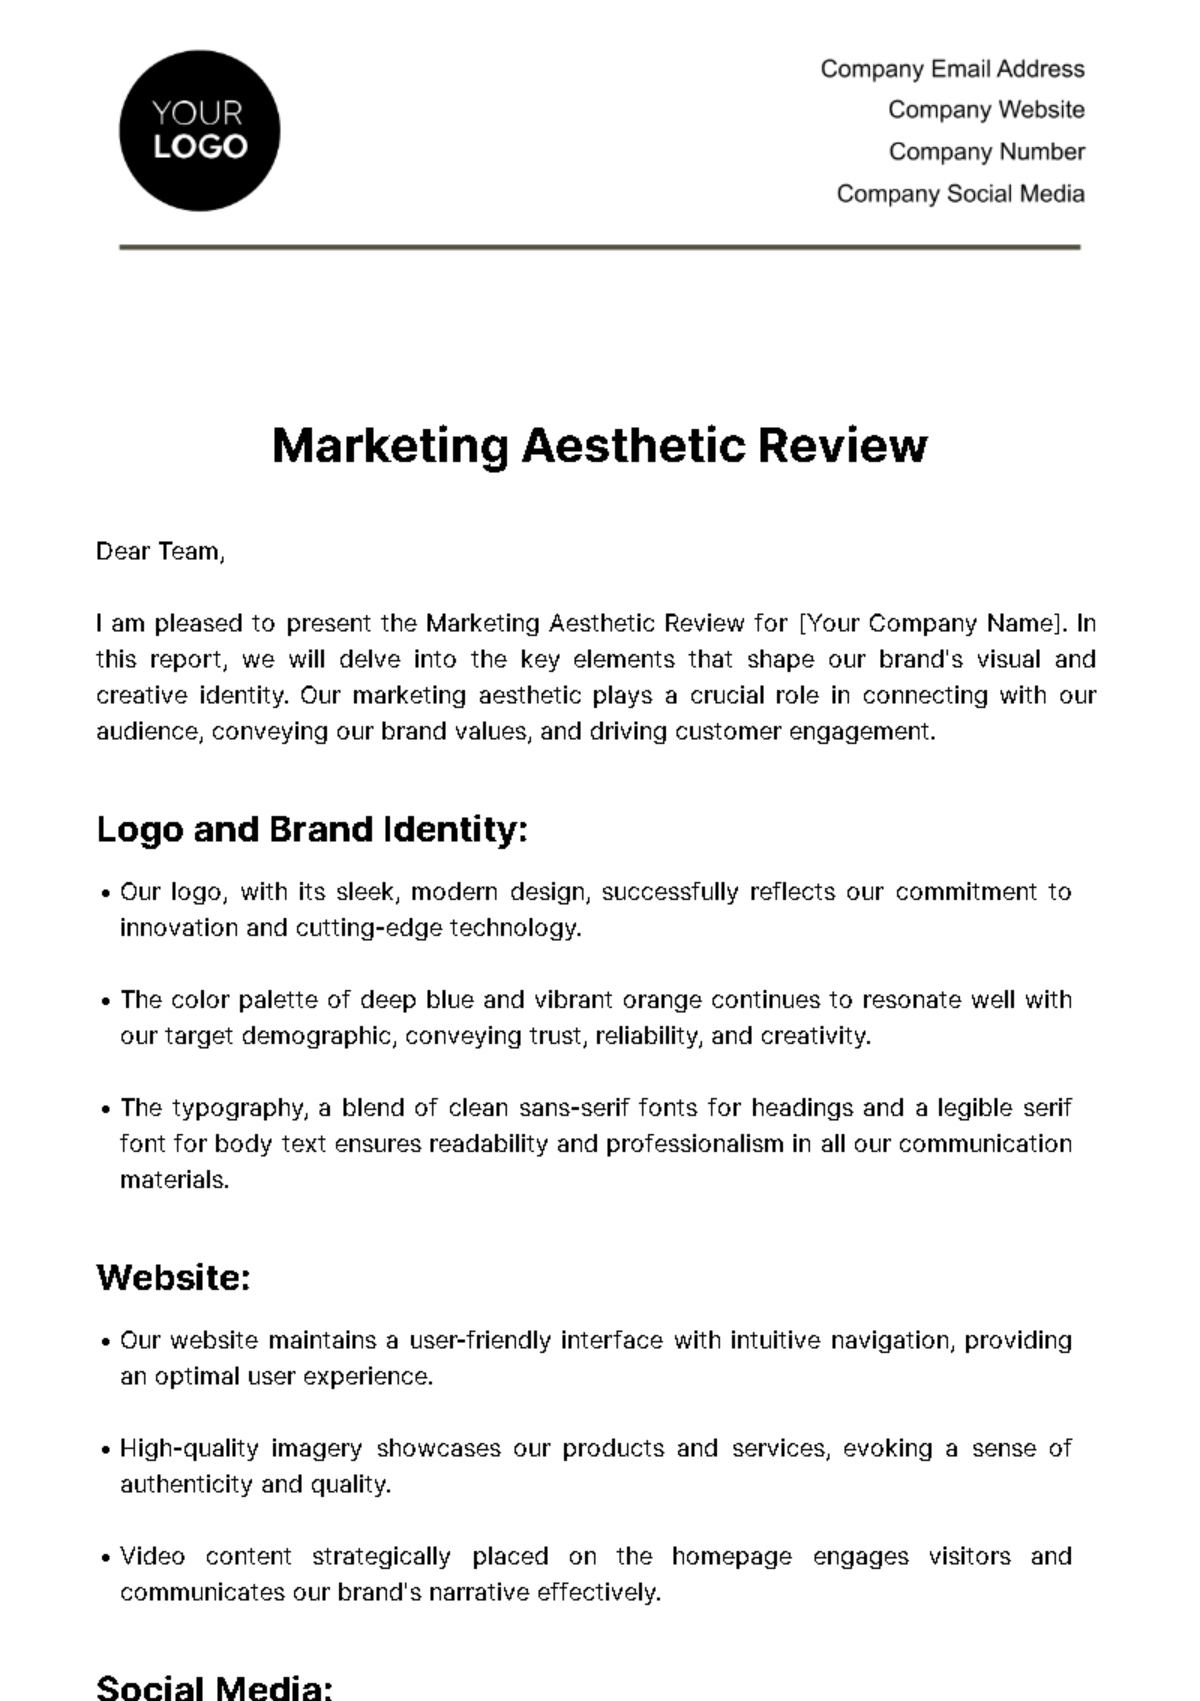 Free Marketing Aesthetic Review Template